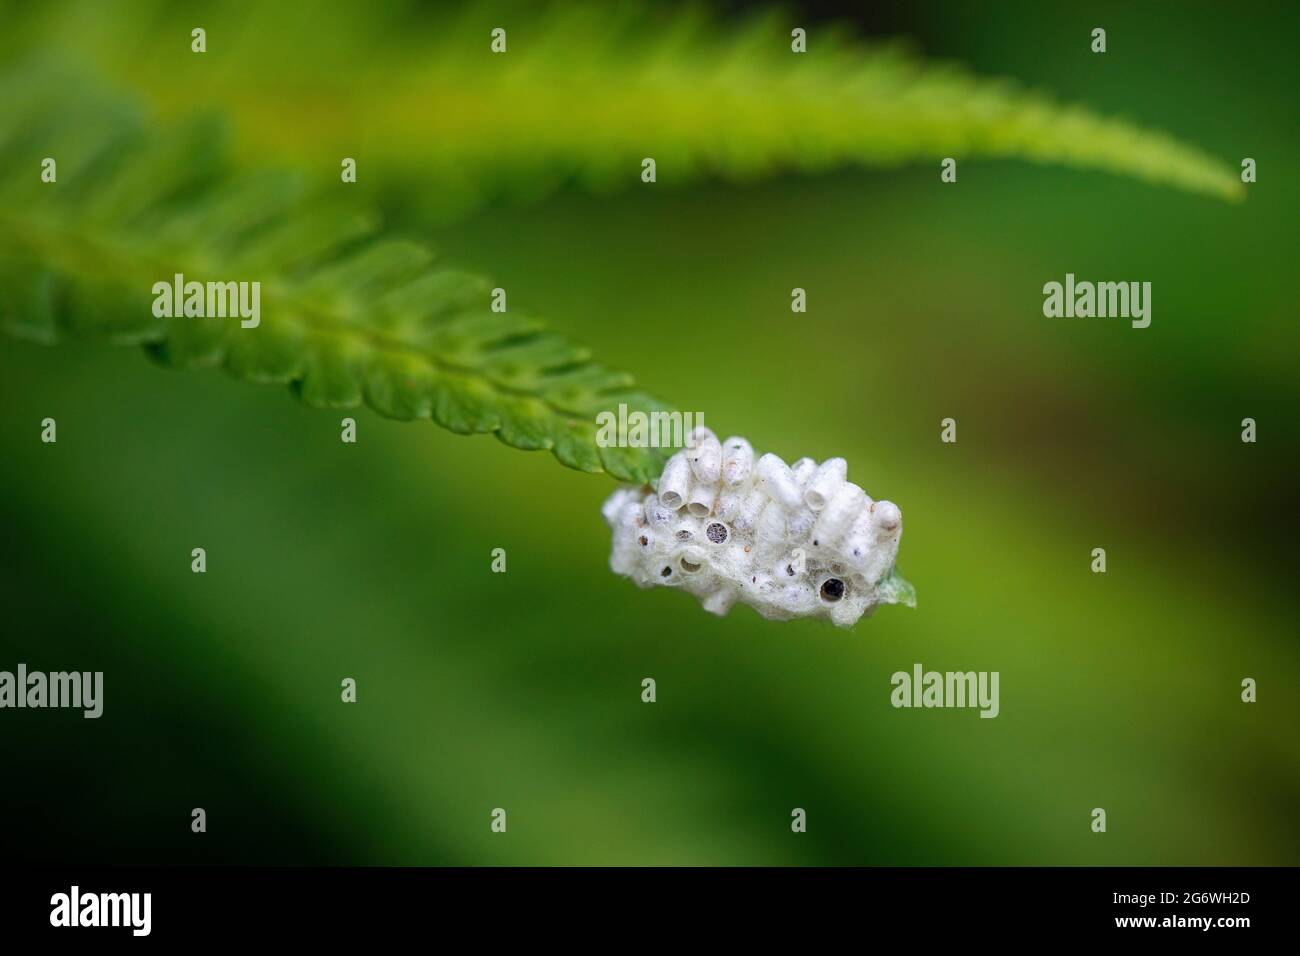 Cocoons of a parasitic wasp on a fern leaf - Asheville, North Carolina, USA Stock Photo